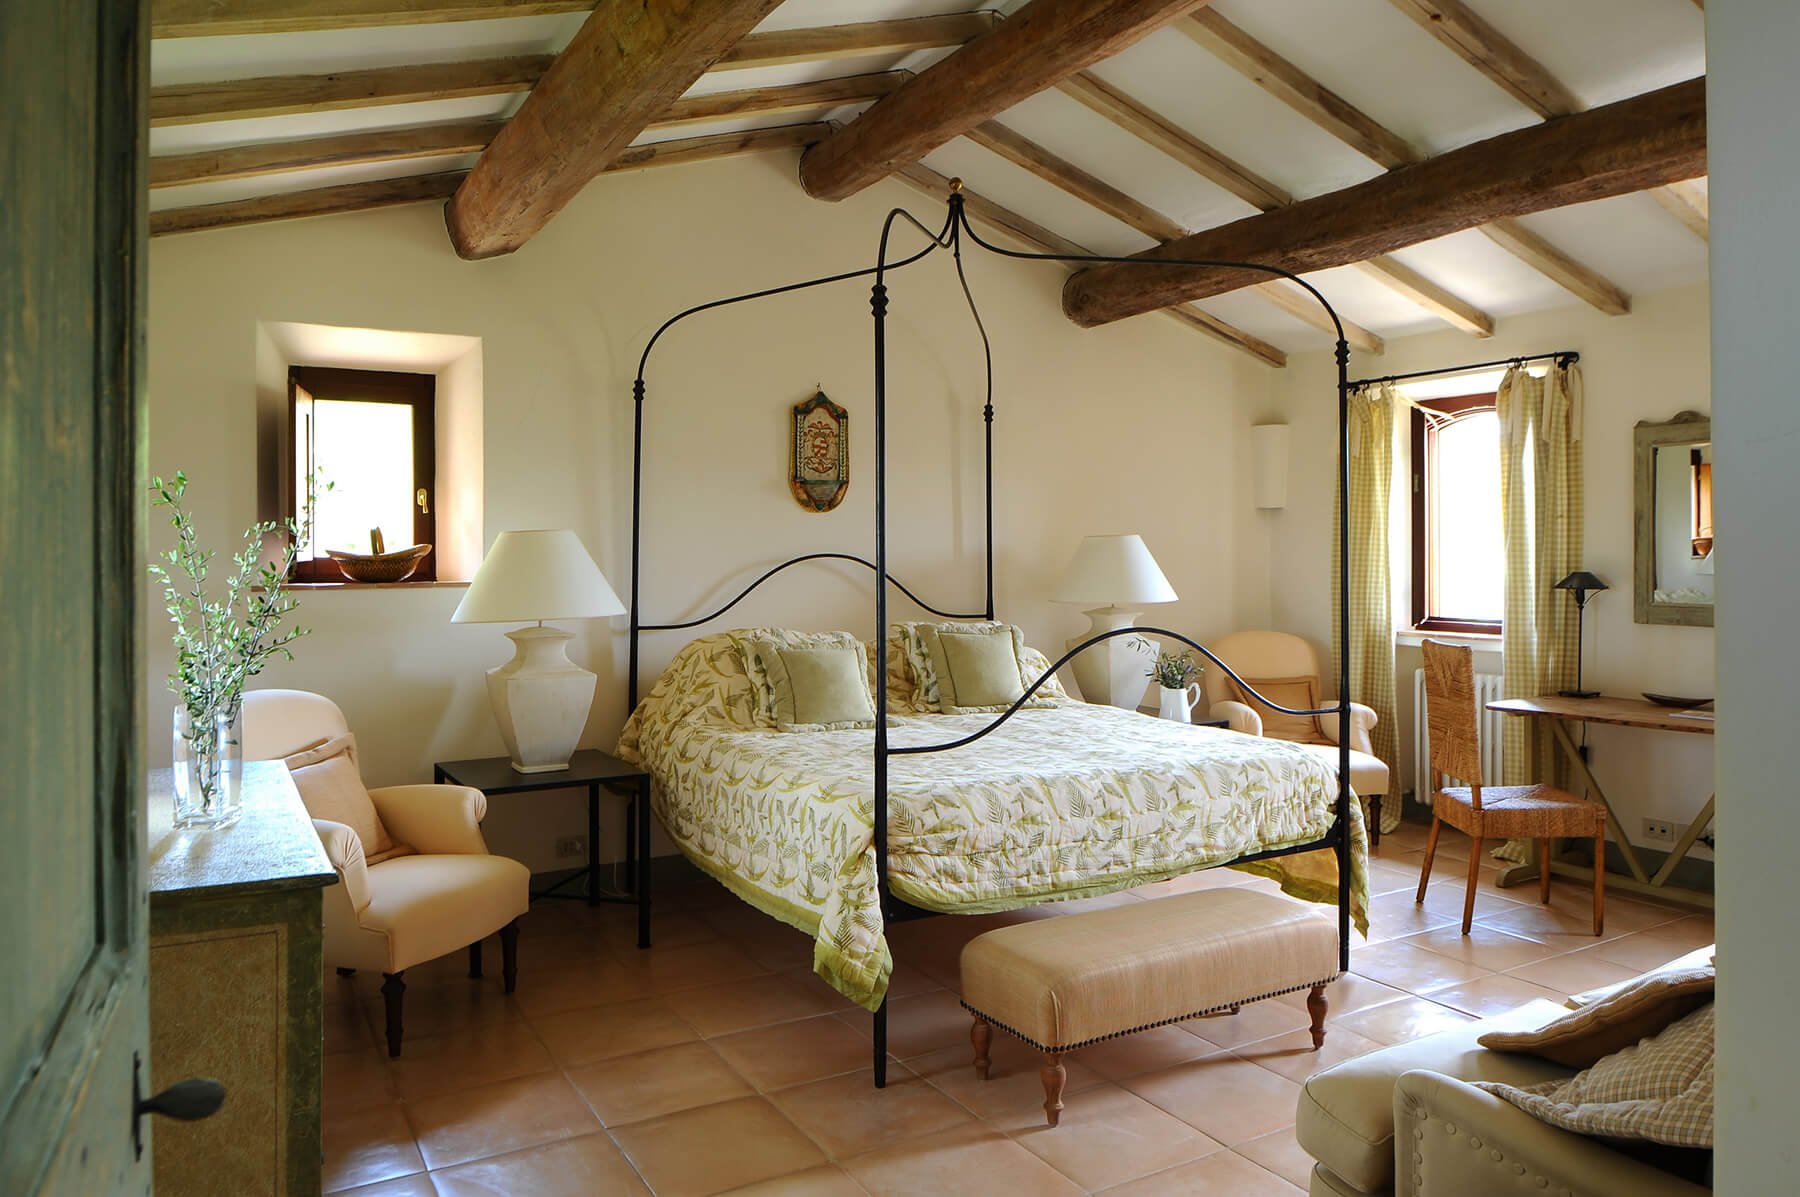 Francis York This Boutique Farmhouse in the Umbrian Hills is Available as a Luxury Villa Rental 20.jpg